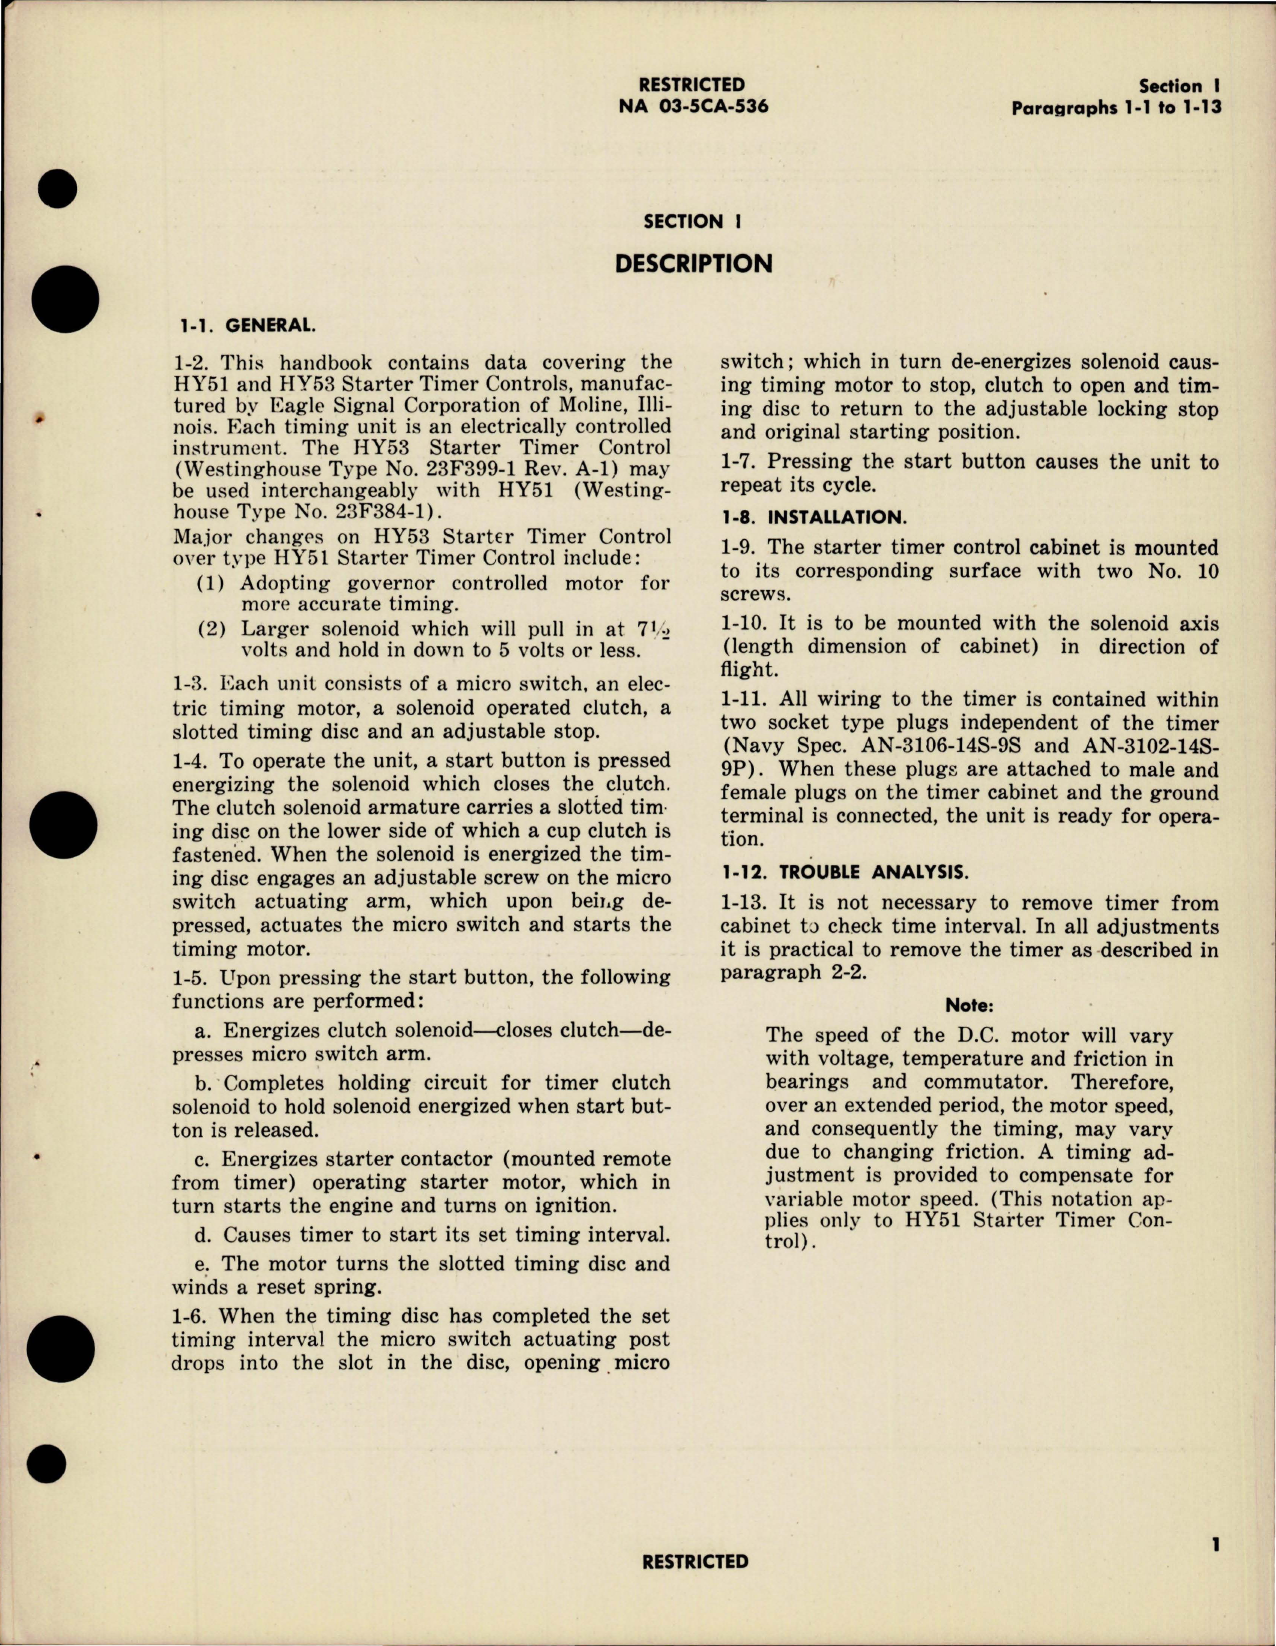 Sample page 7 from AirCorps Library document: Operation, Service, Overhaul Instructions with Parts for Starter Timer Control - Model HY-51 